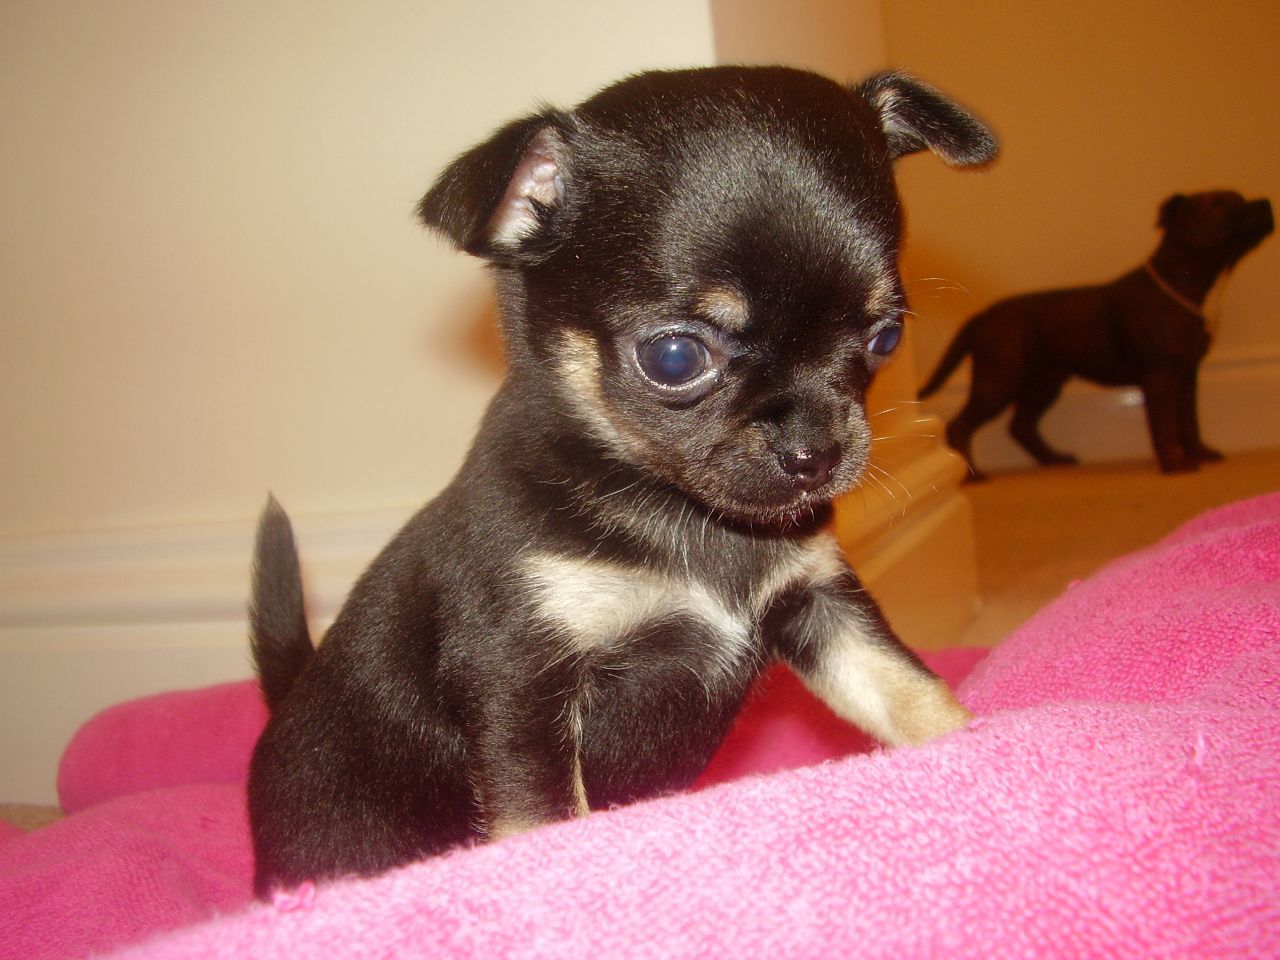 Teacup Chihuahua Puppies for Sale Near Me on Craigslist - wide 9